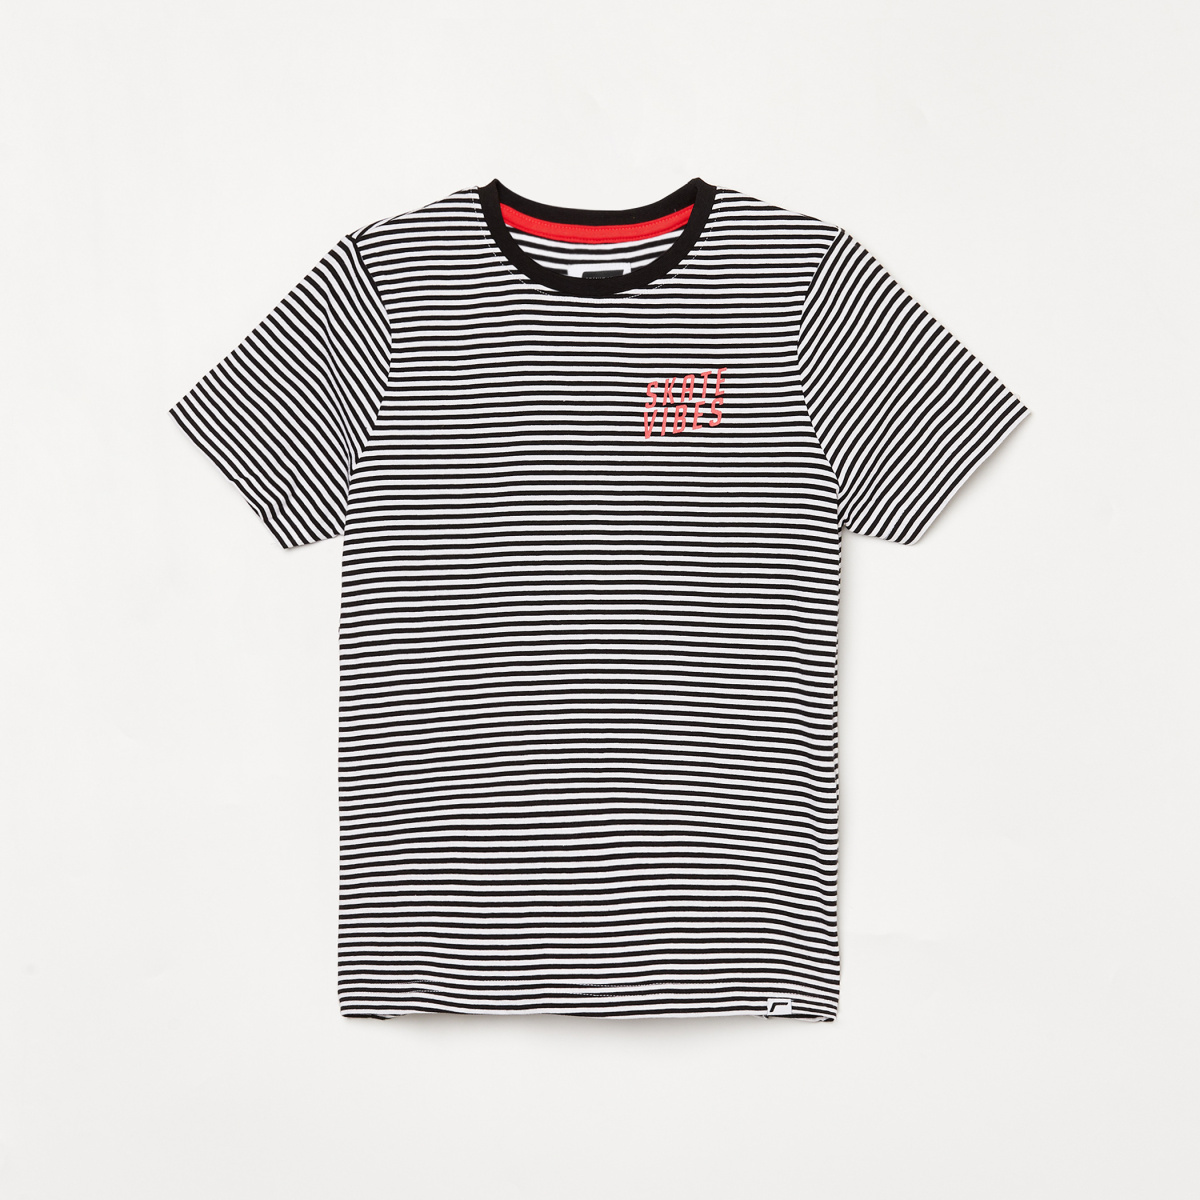 FAME FOREVER YOUNG Boys Striped Crew Neck T-shirt